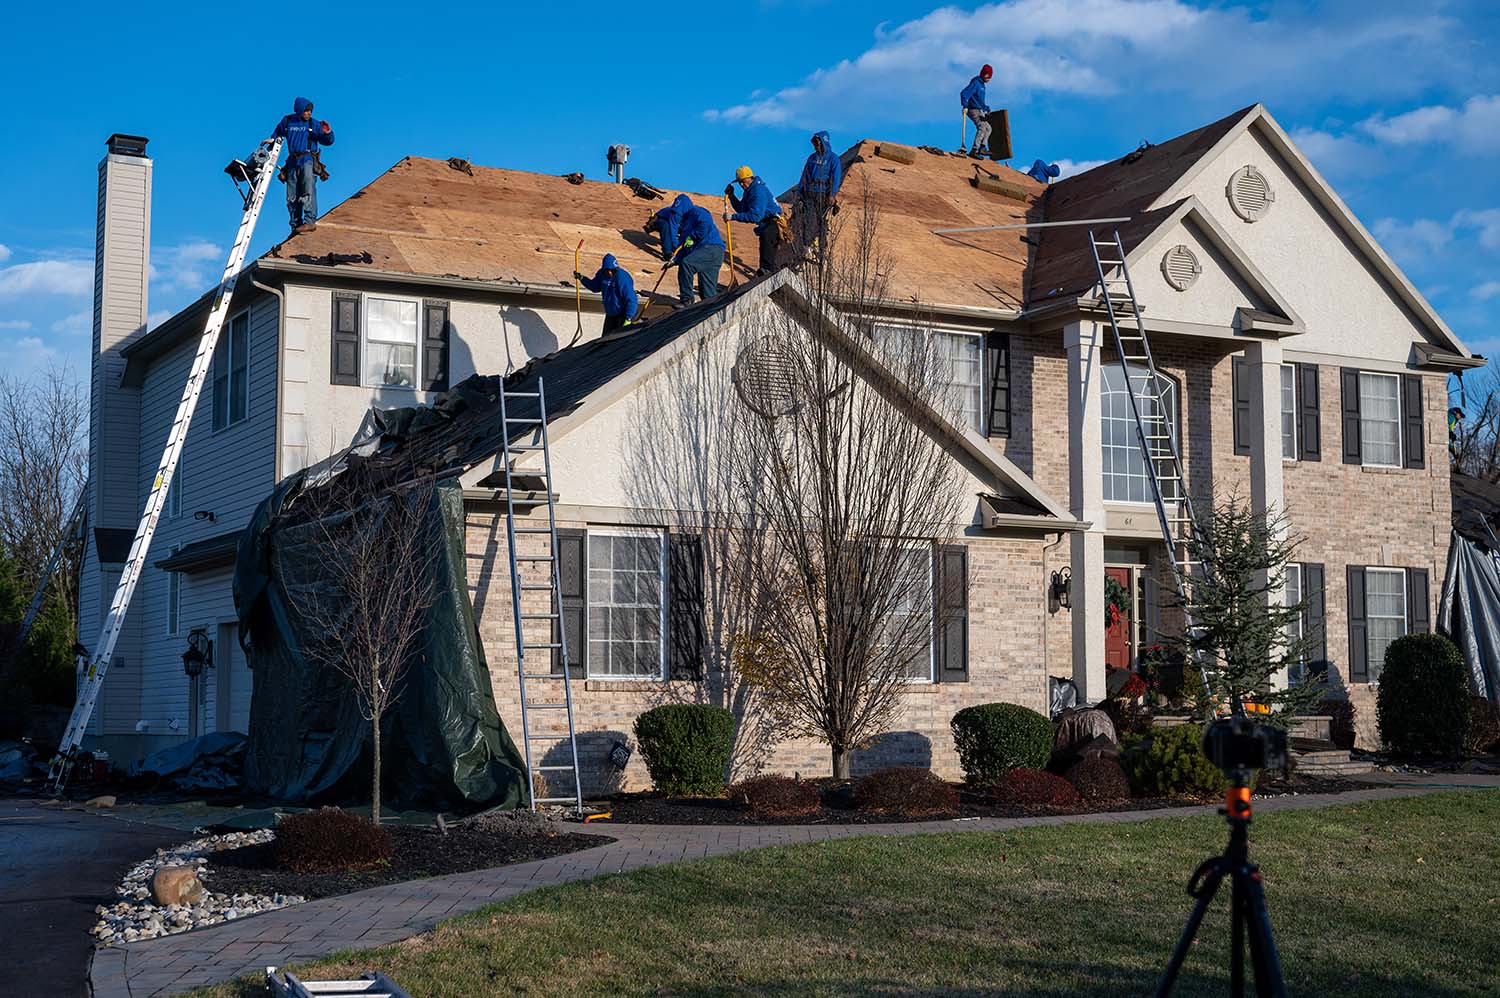 New Jersey Roofing repair company - residential roofing contractors in Cherry Hill (medium image)